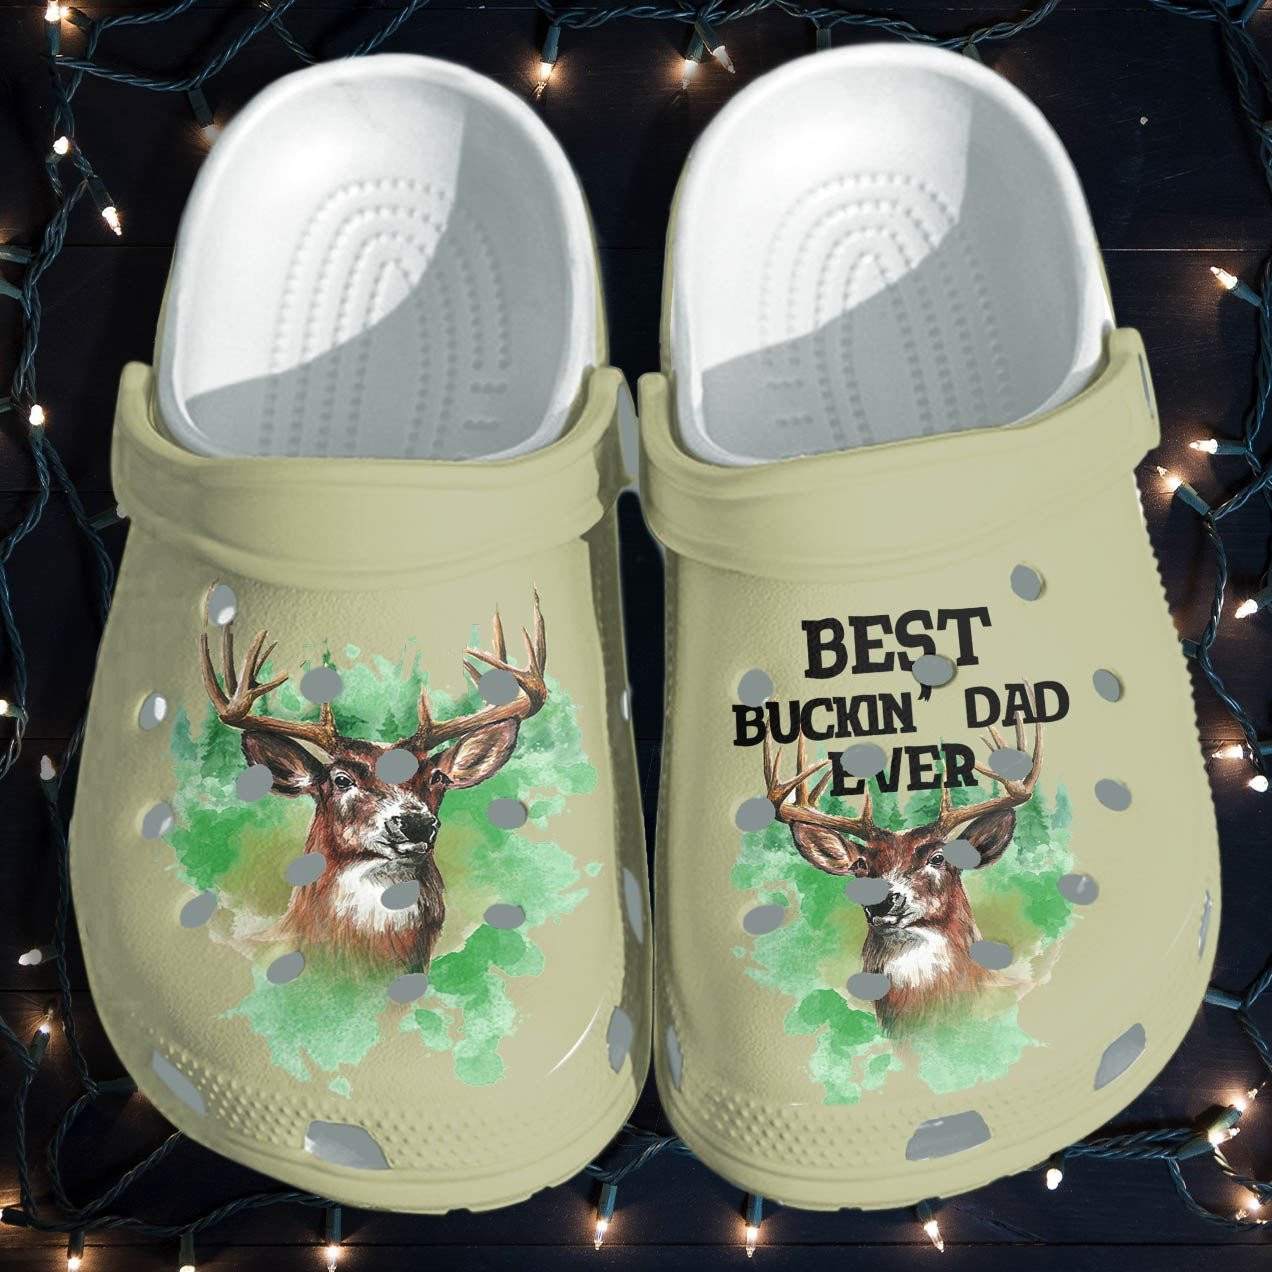 Best Buckin Dad Ever Deer Hunting Shoes Crocs - Camping Deer Hunter Shoes Gifts For Grandpa Fathers Day 2022